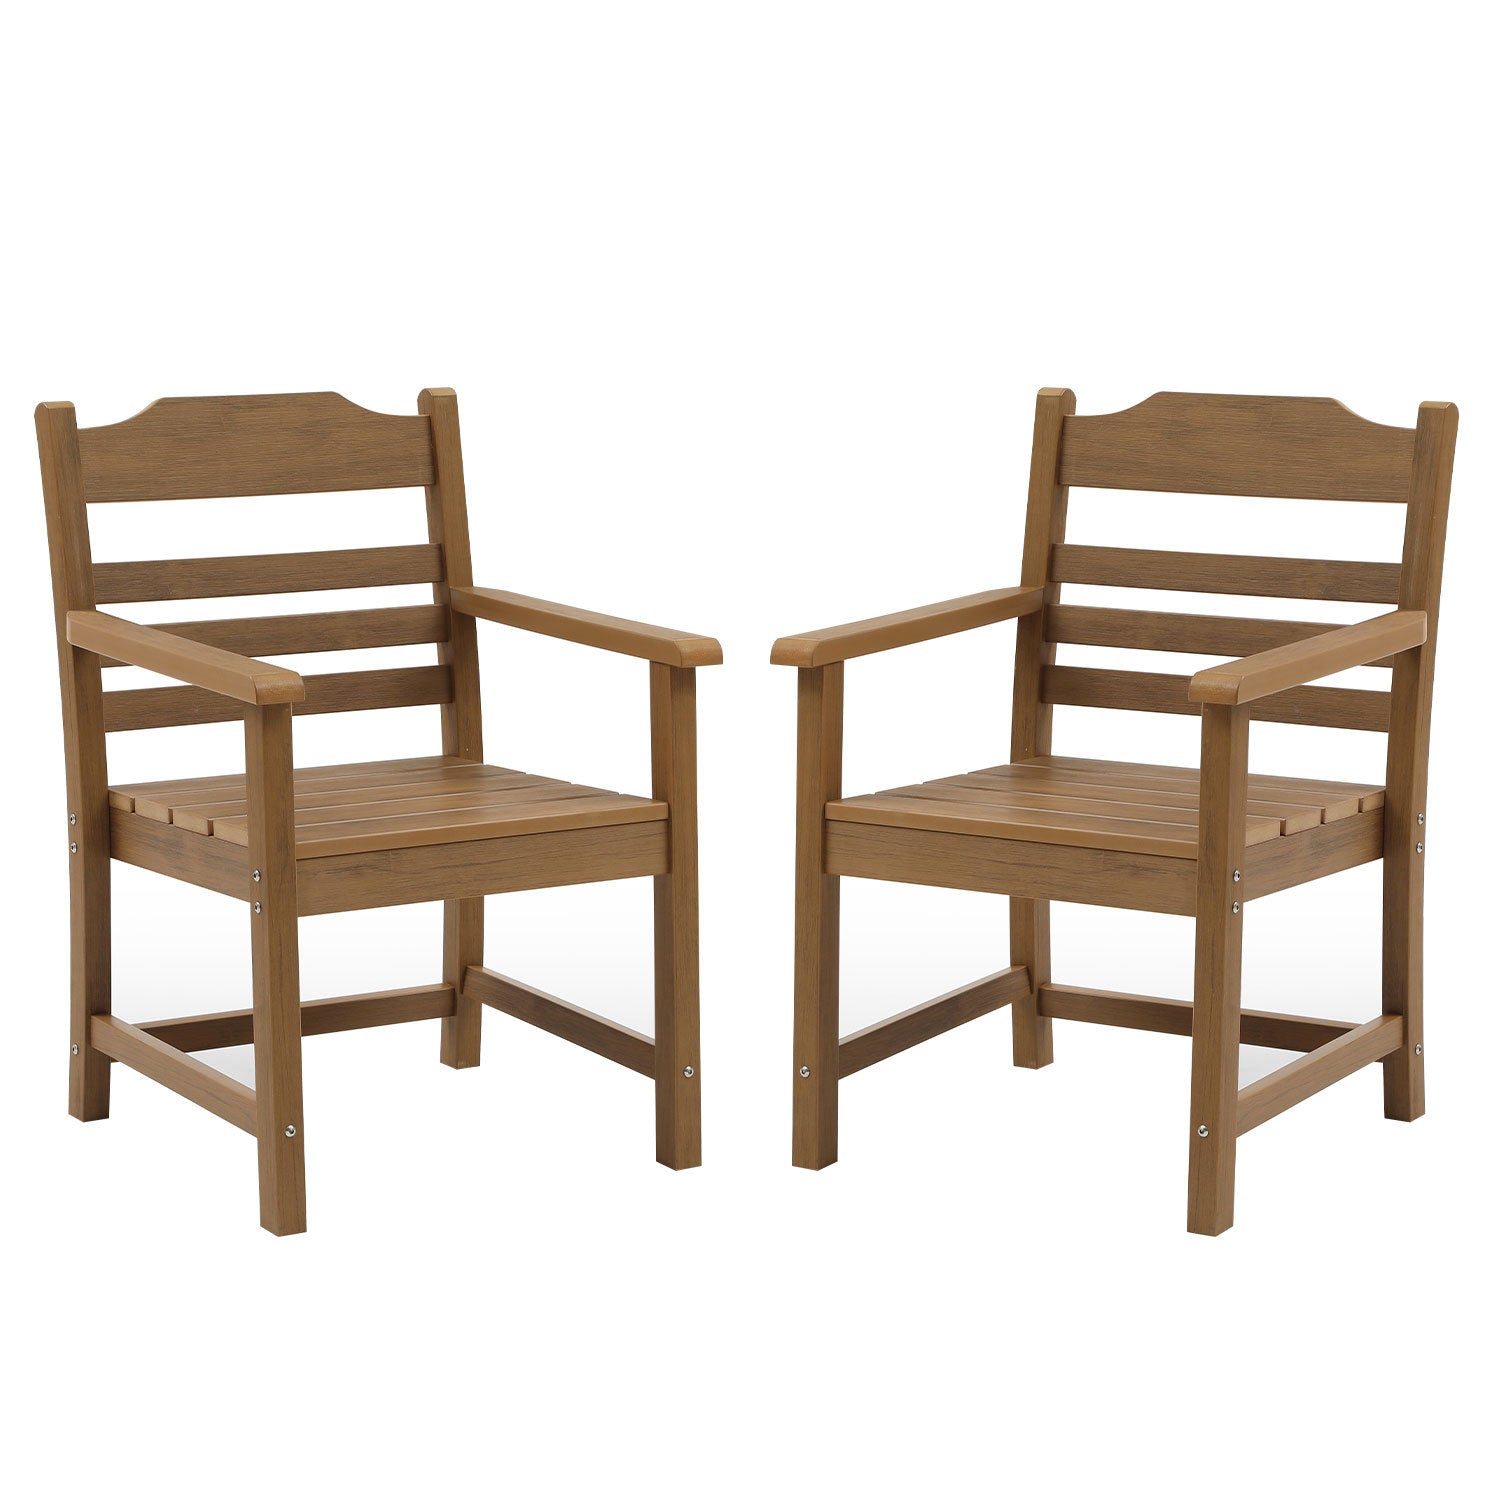 Patio Dining Chair with Armset Set of 2, HIPS light teak-hdpe